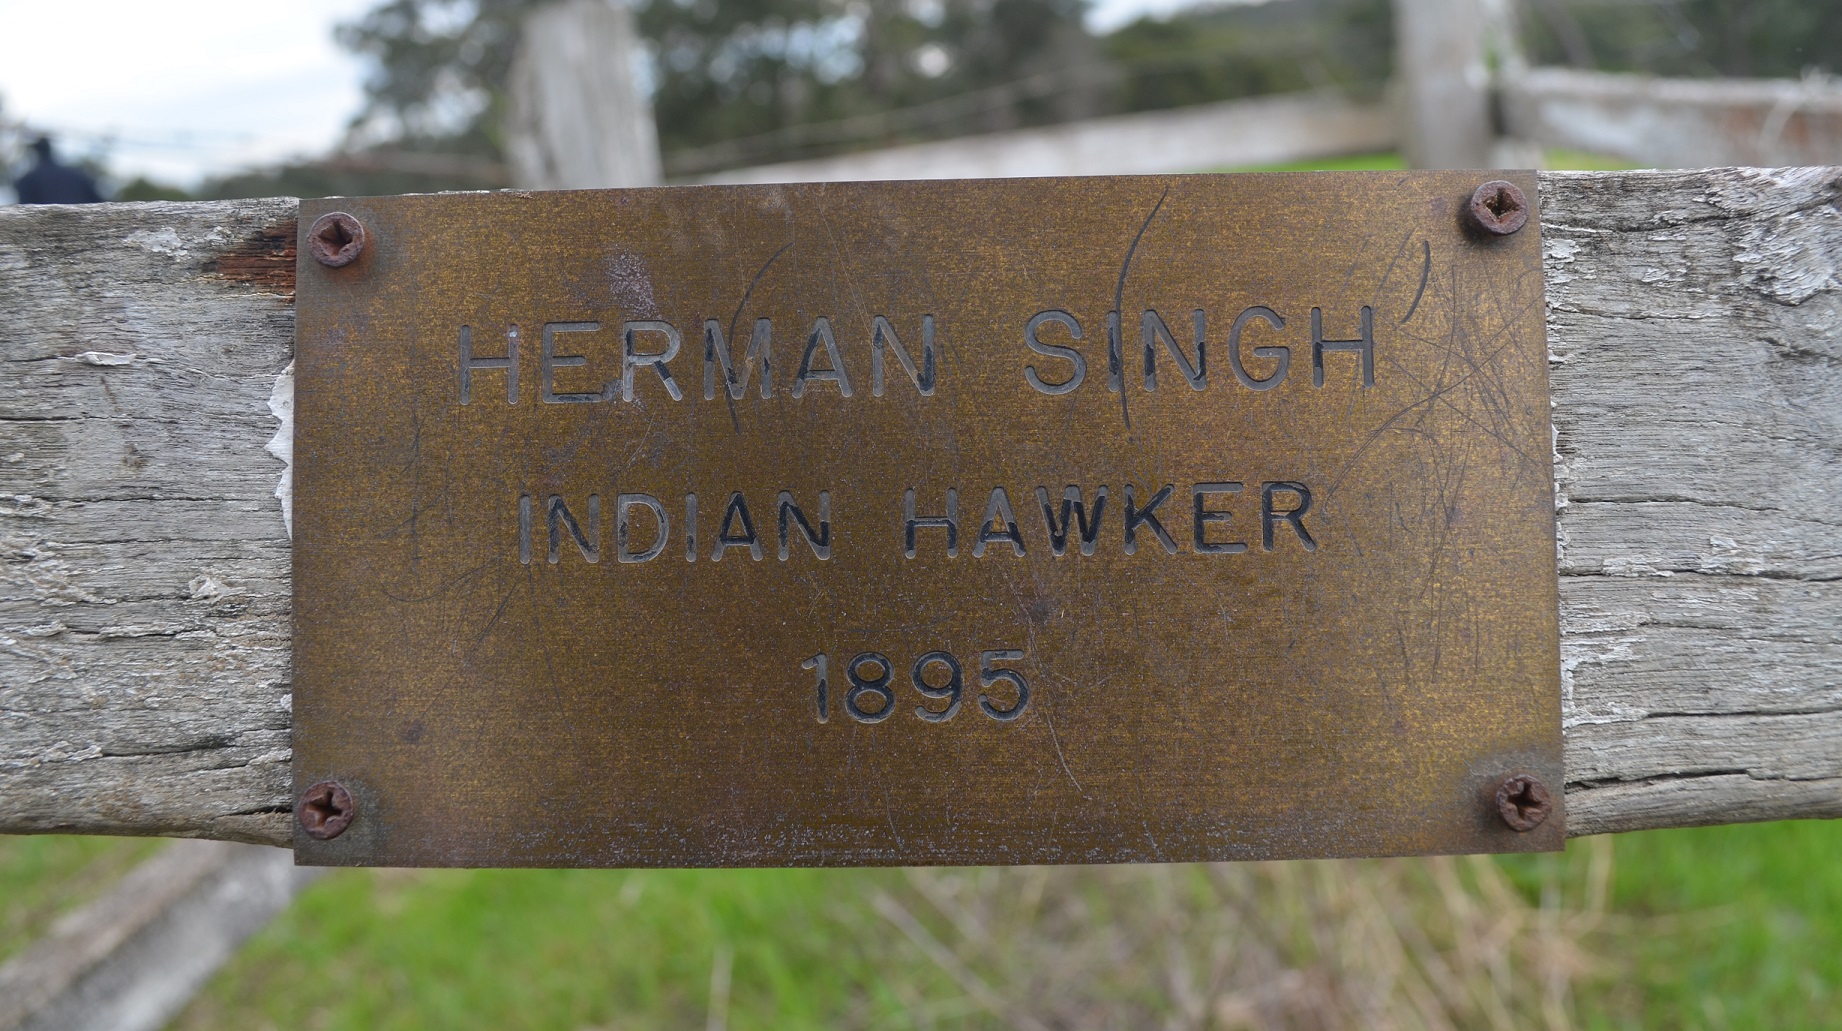 It is interesting that the date on this inscription at the cremation site states 1895 when Herman Singh died in 1901. Quite possible that this was the date Herman Singh began visiting the Muir farm.